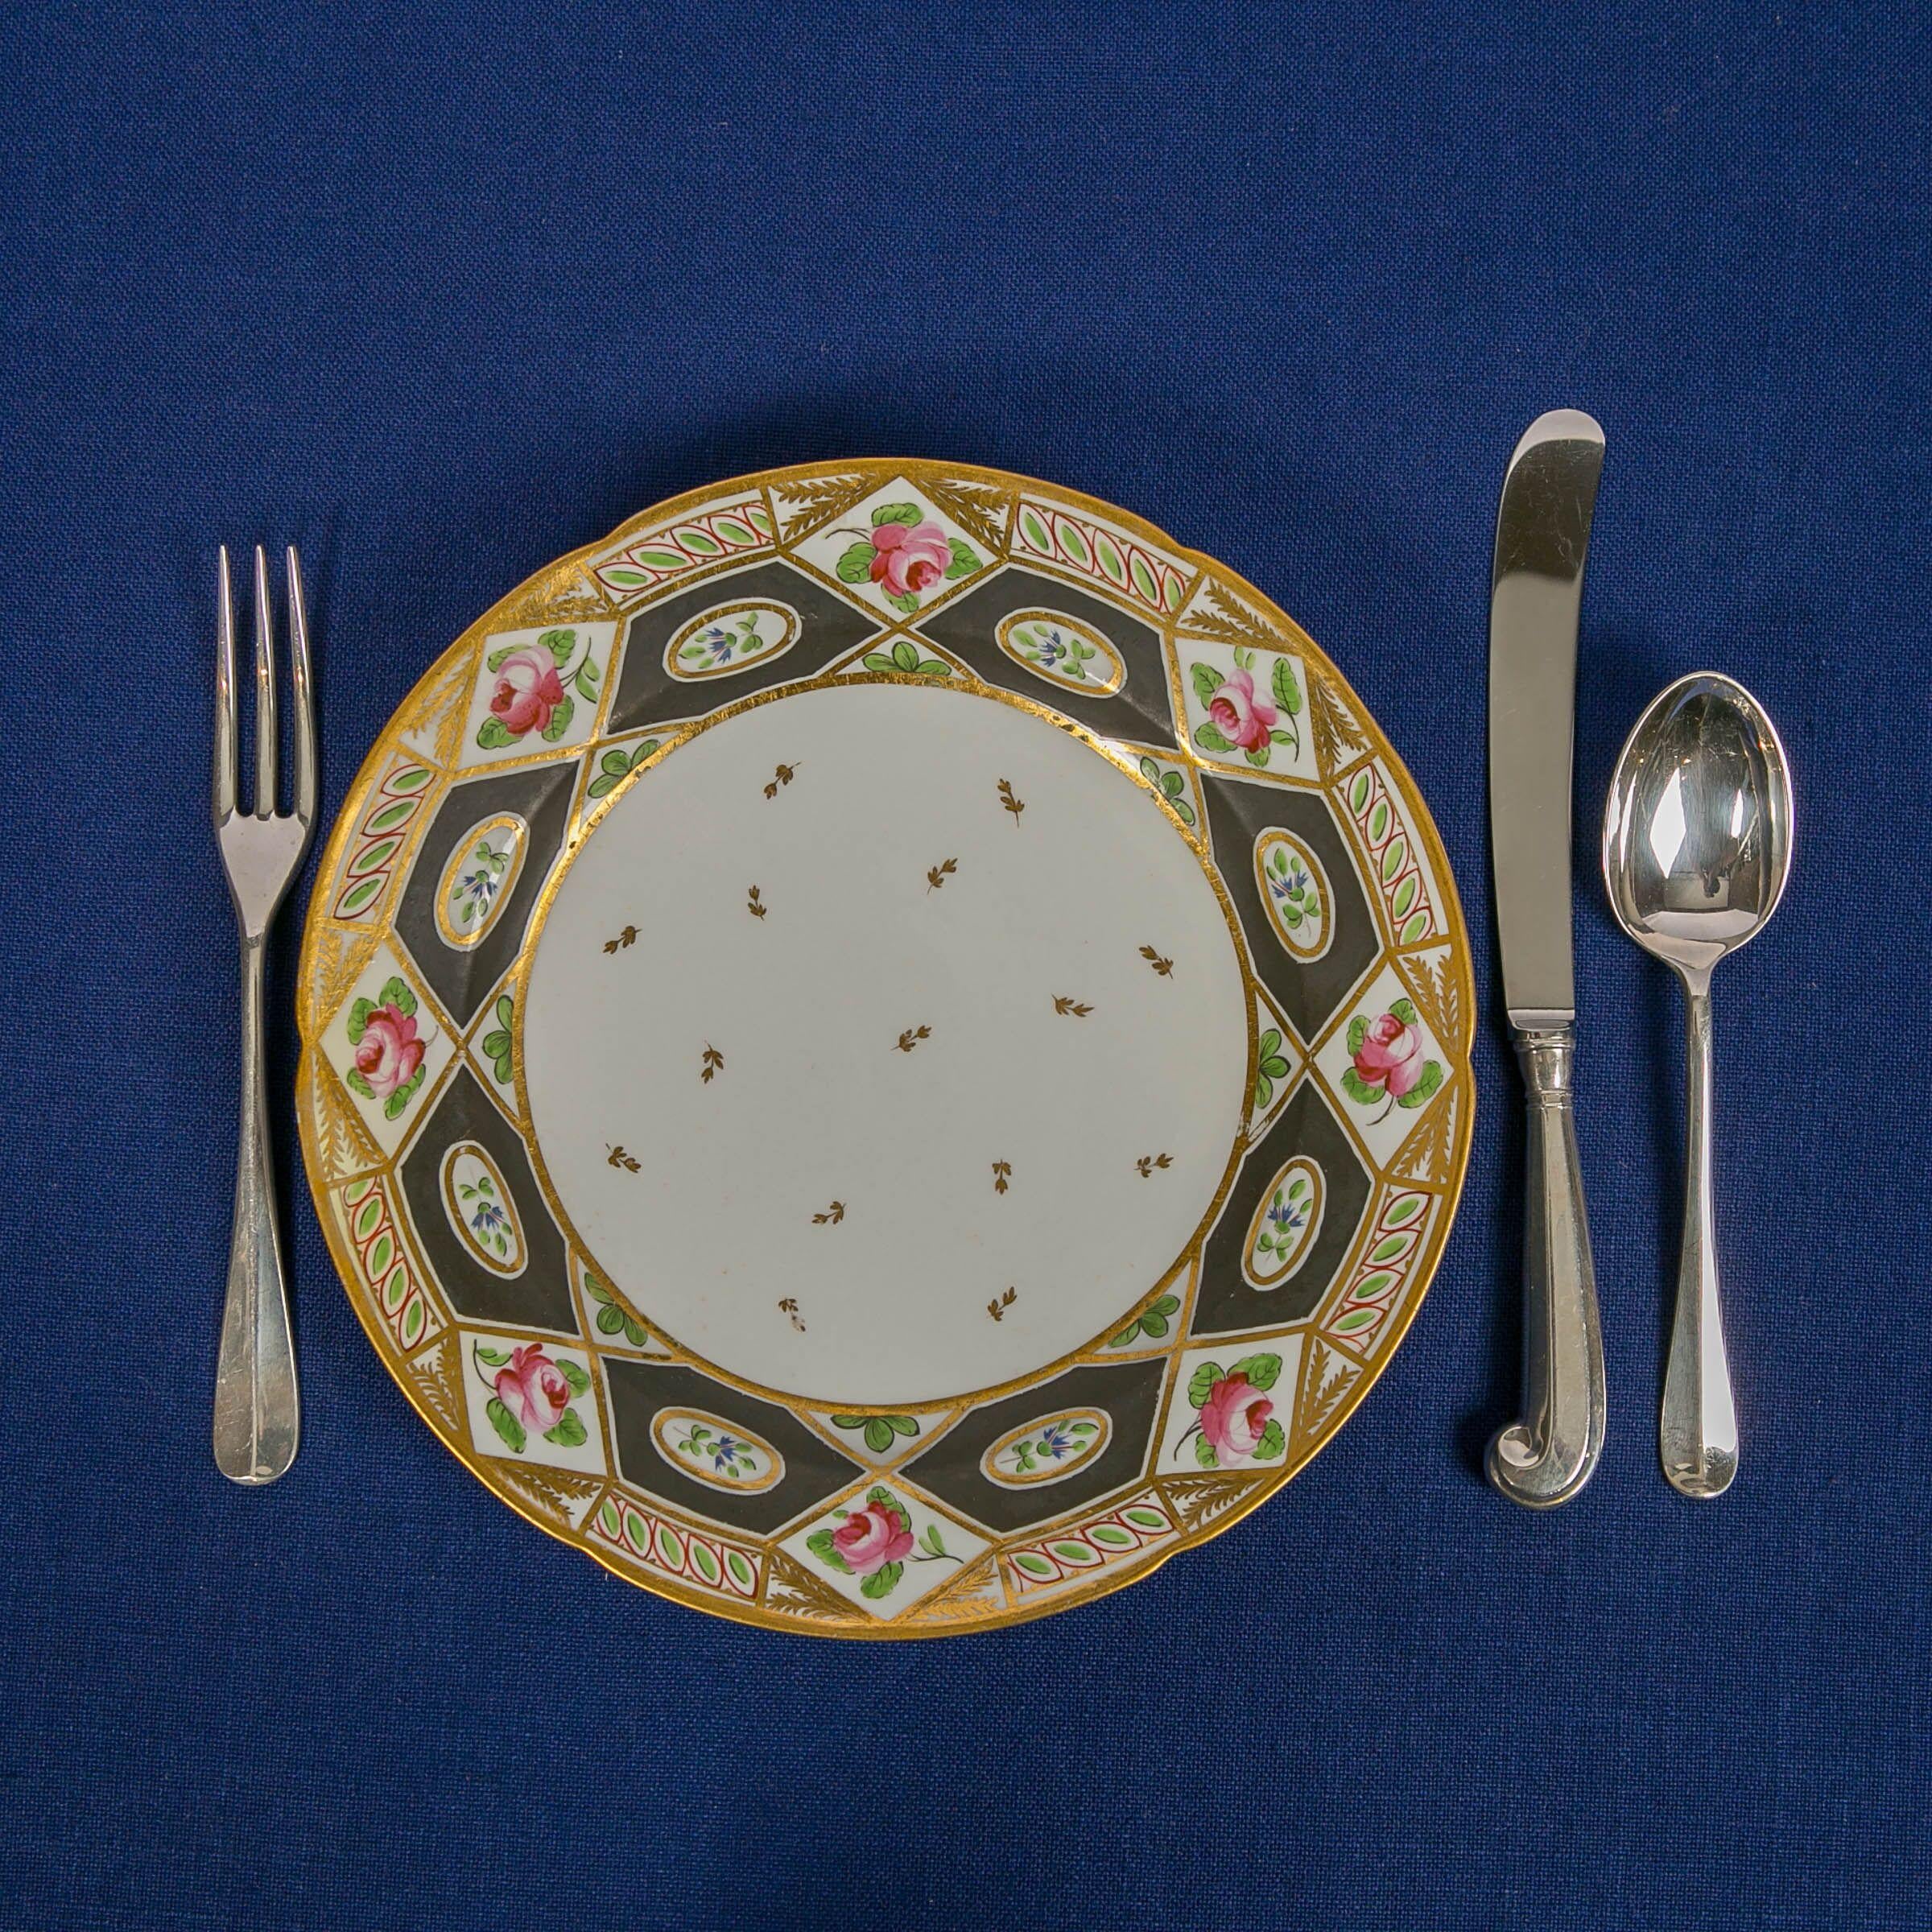 Set Four Antique English Dishes Made By Coalport Hand-Painted Circa 1810  In Excellent Condition For Sale In Katonah, NY